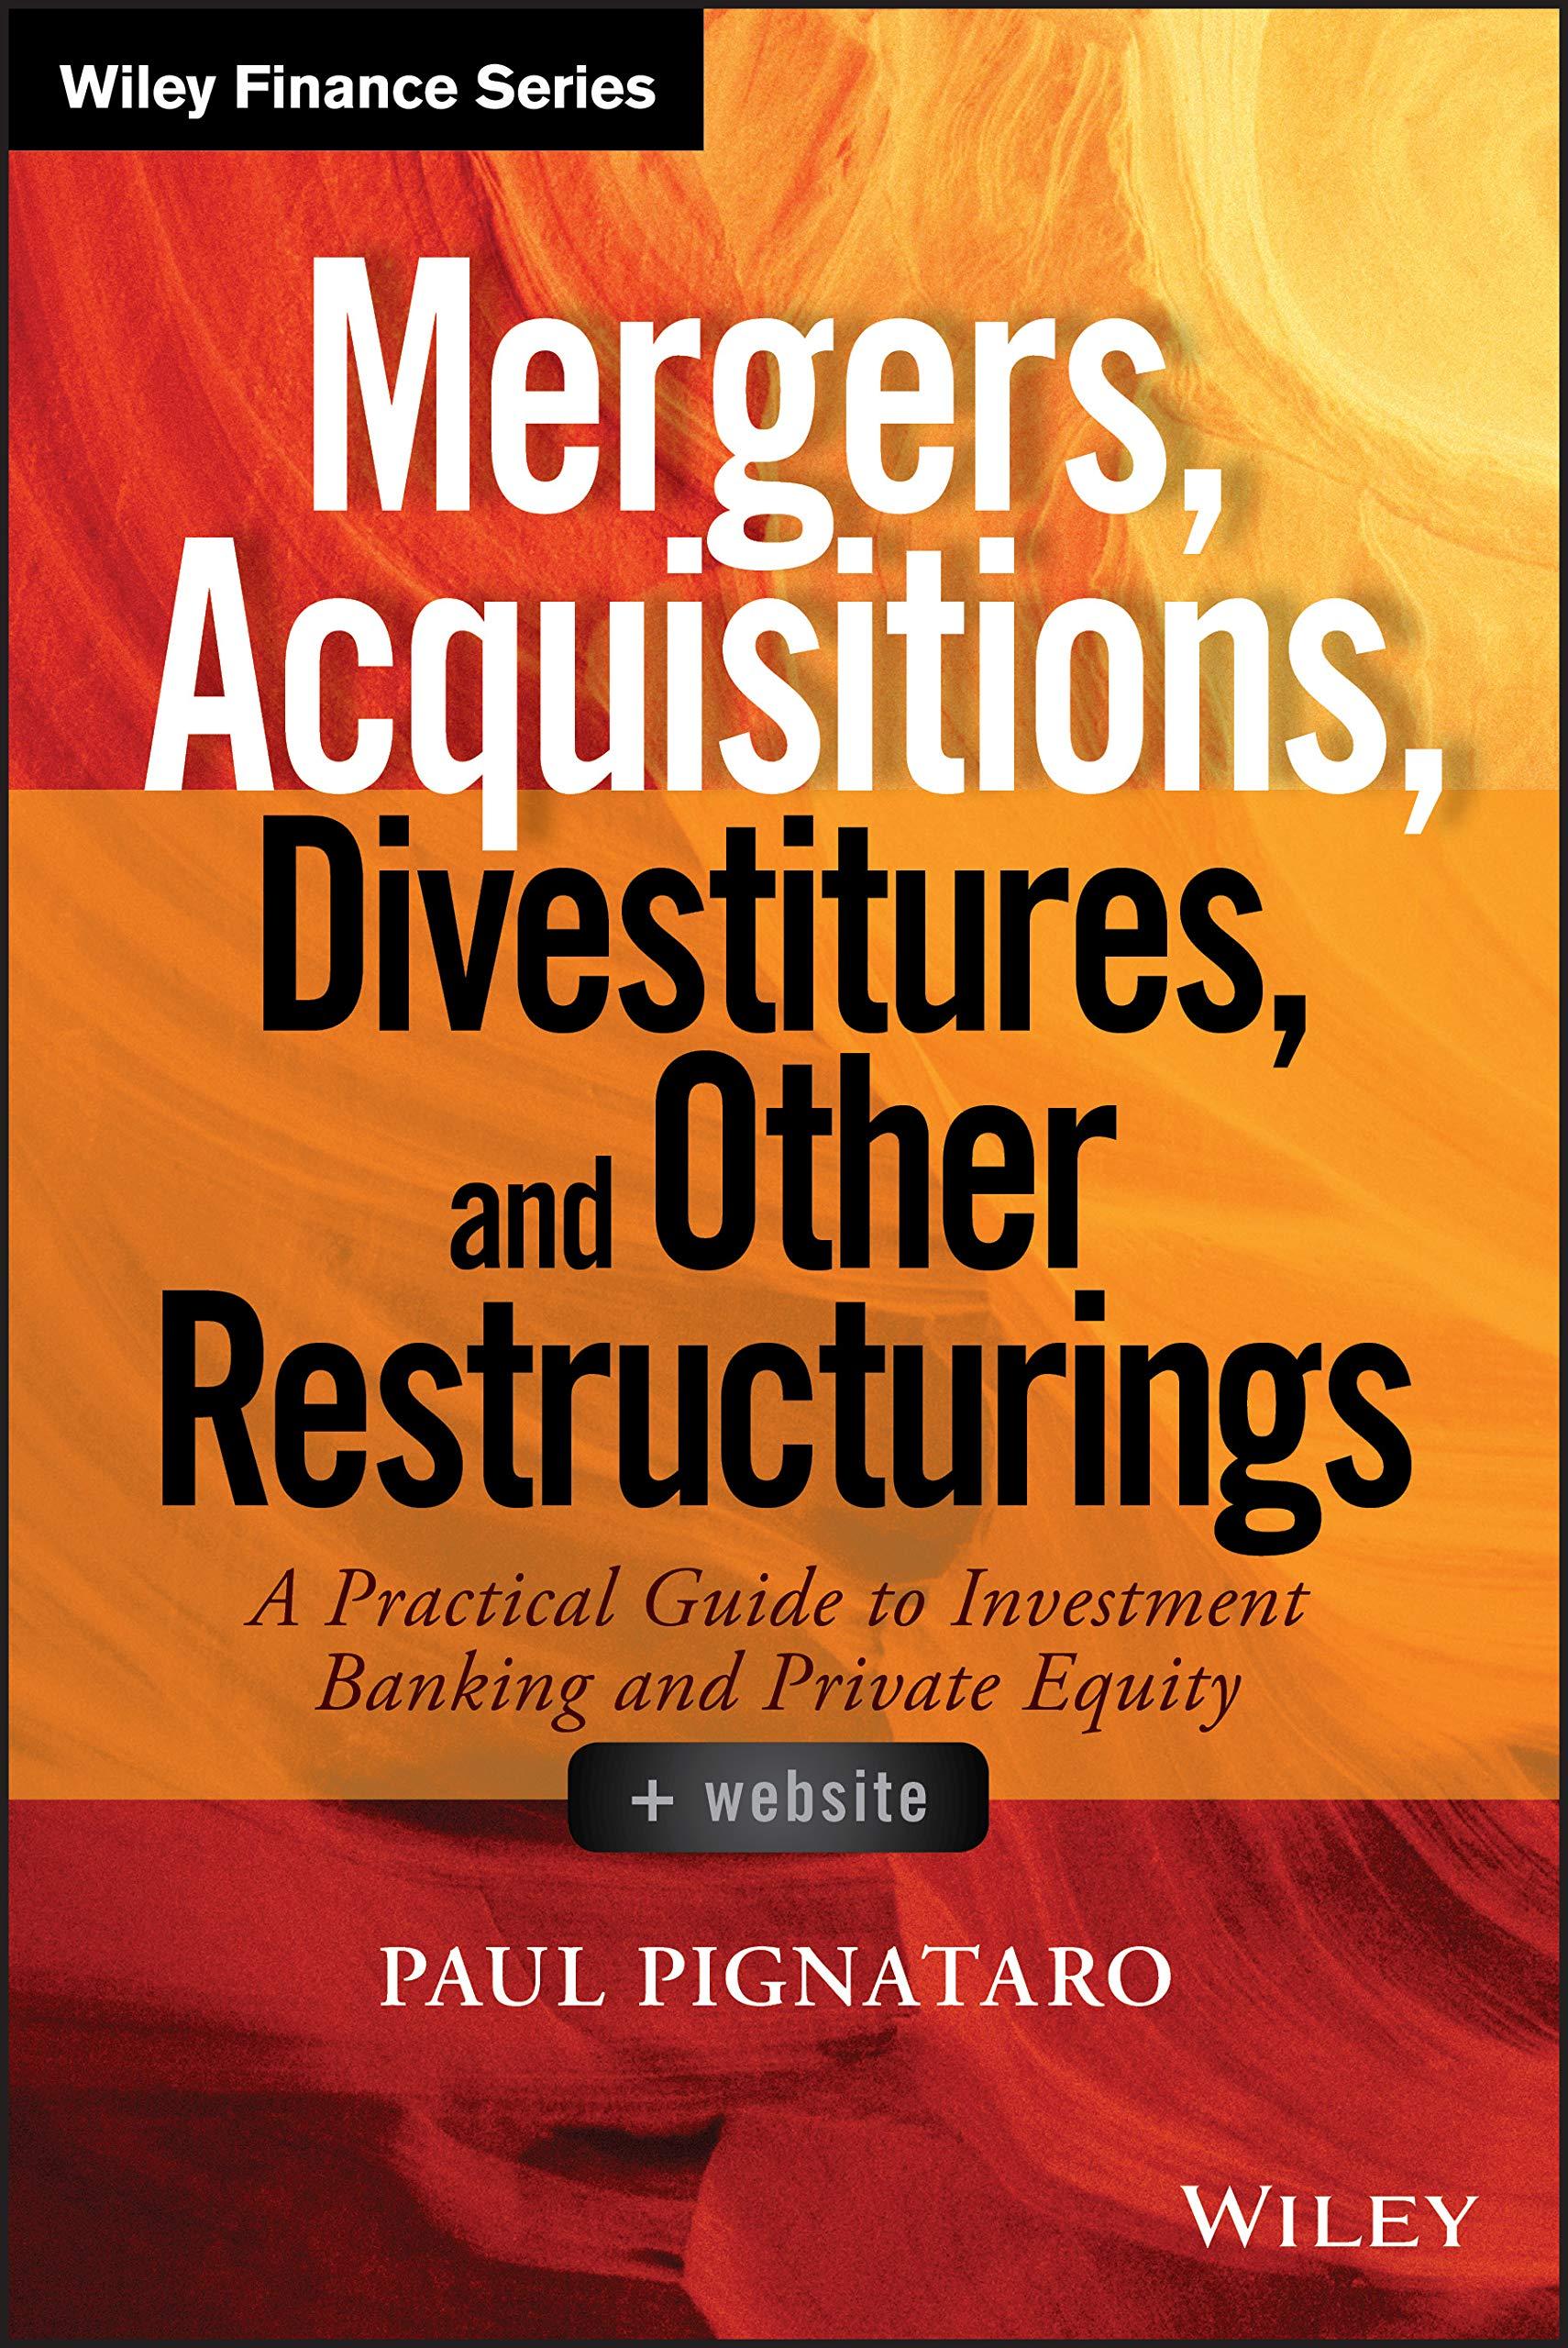 mergers acquisitions divestitures and other restructurings plus website a practical guide to investment